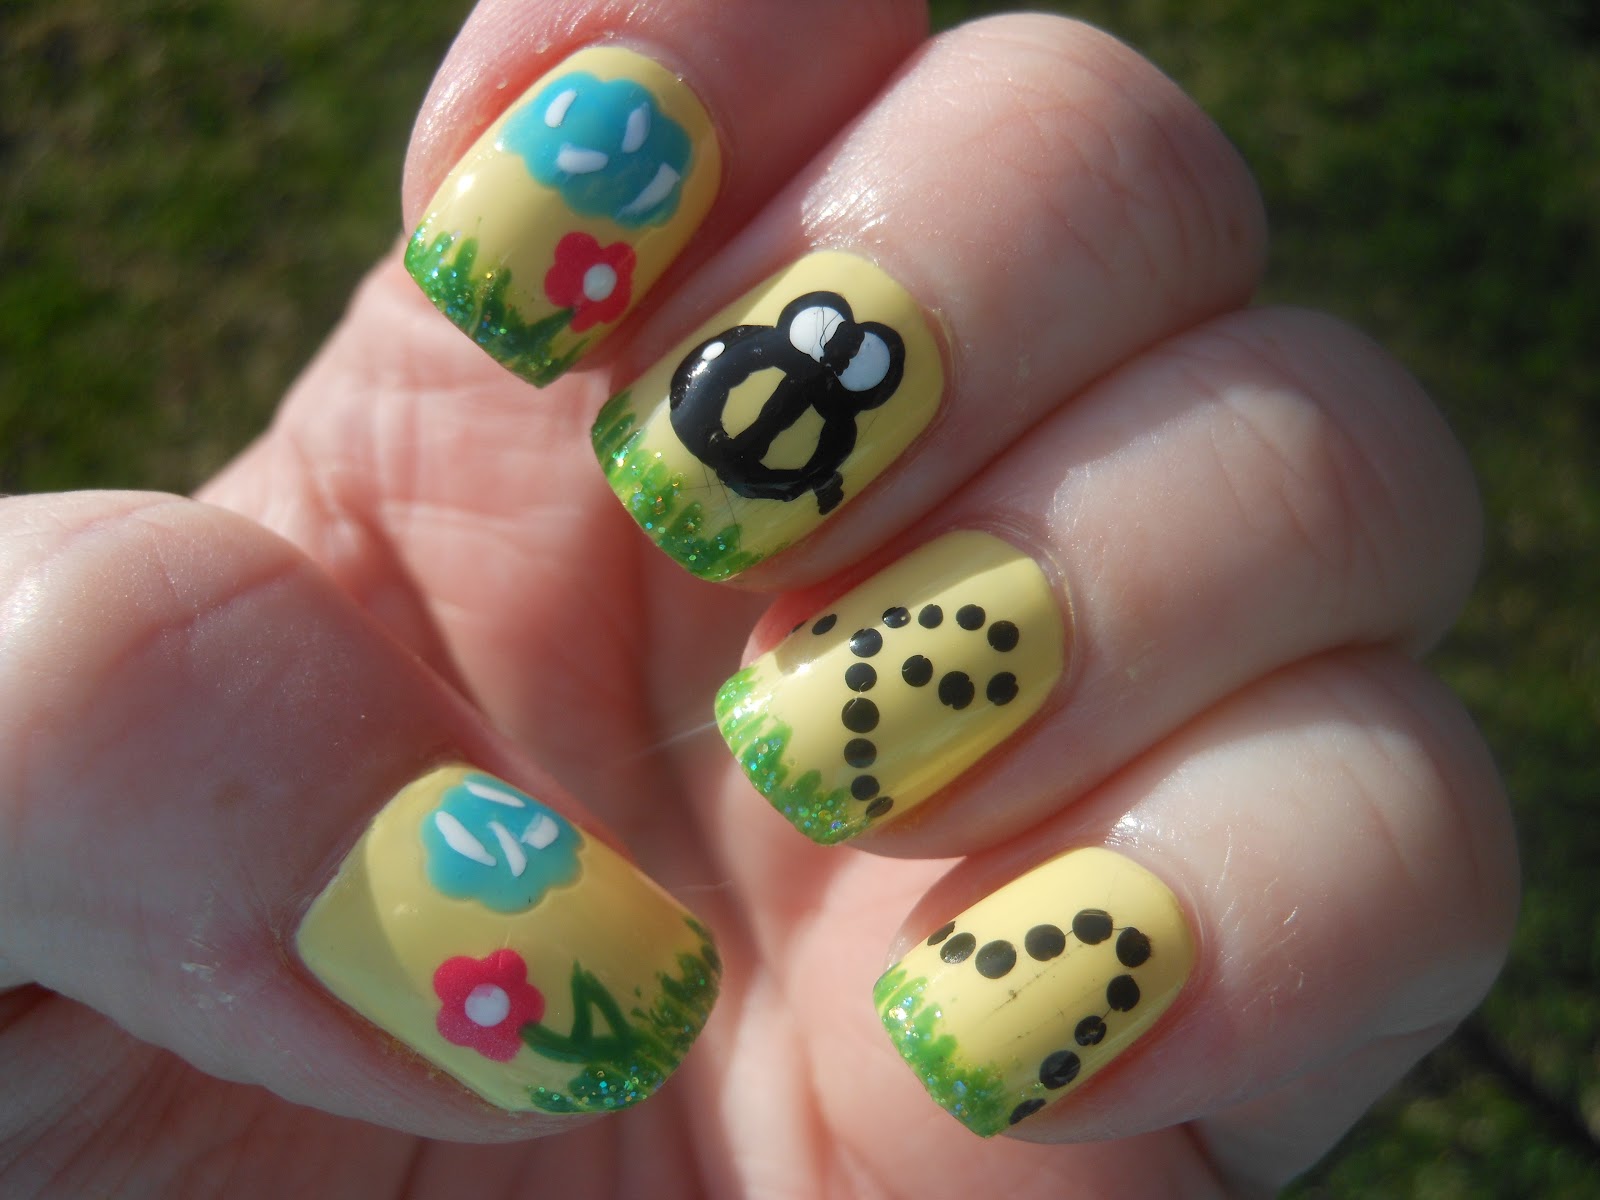 5. "Bee and Flower Nail Art for Beginners" - wide 10